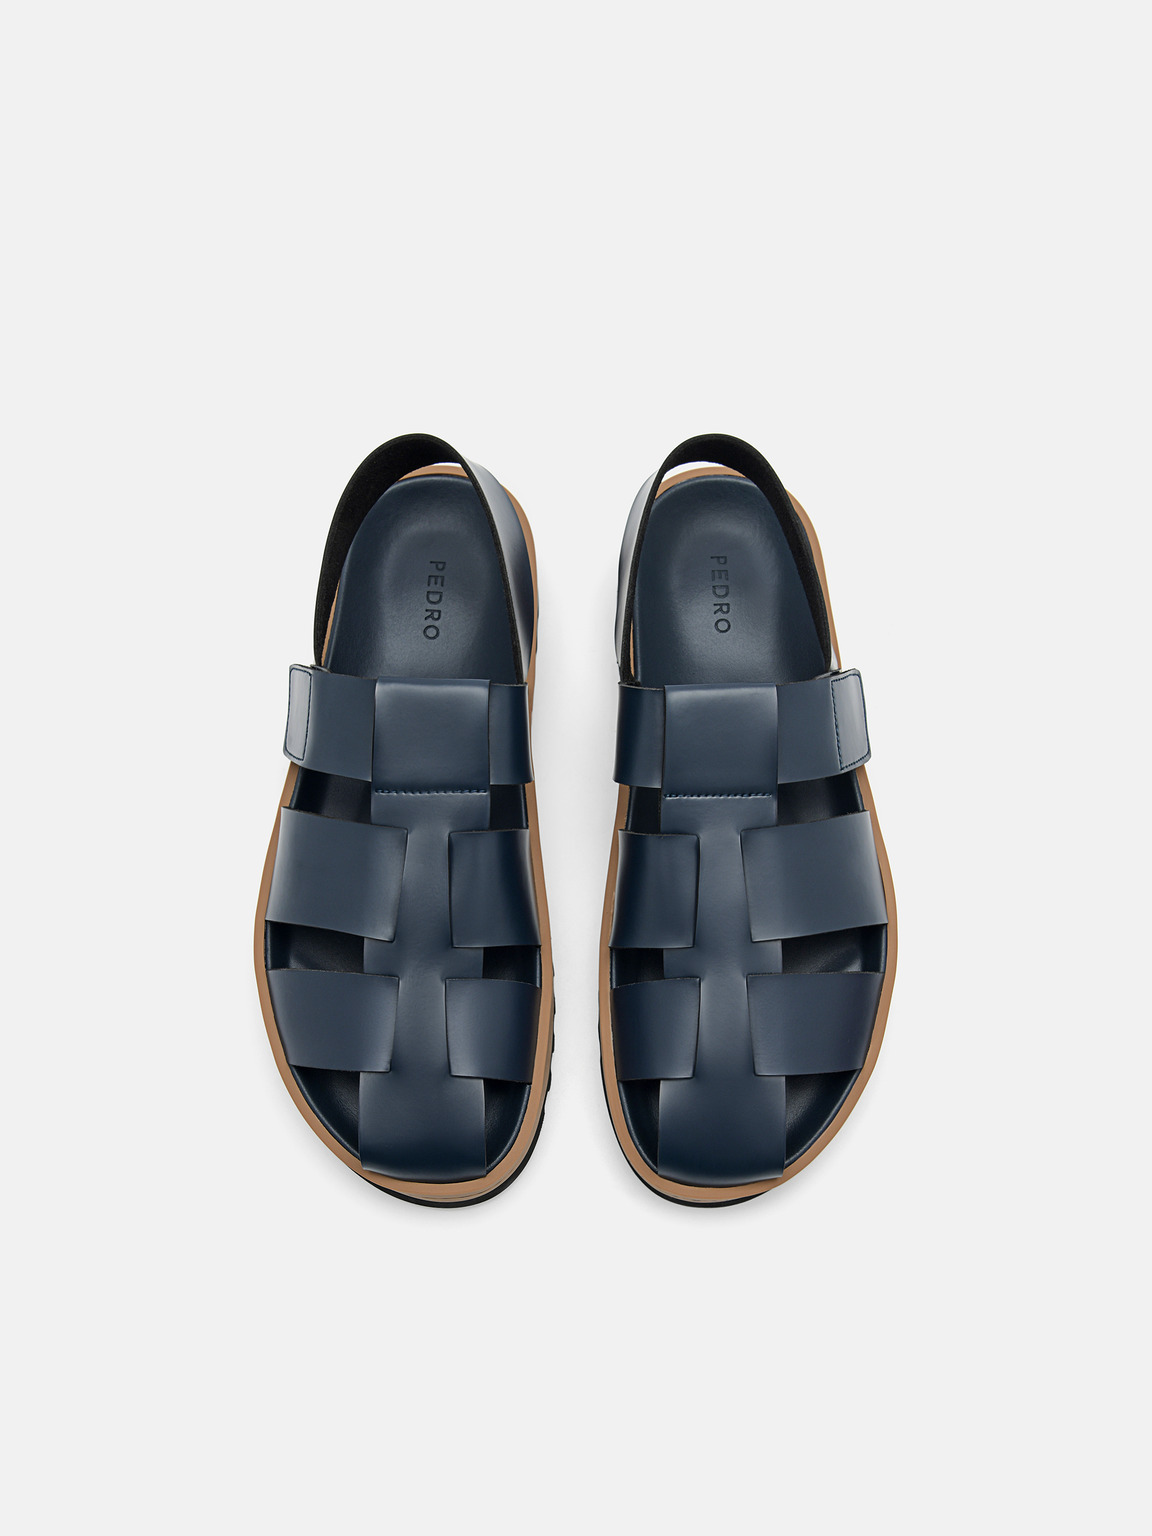 George Caged Sandals, Navy